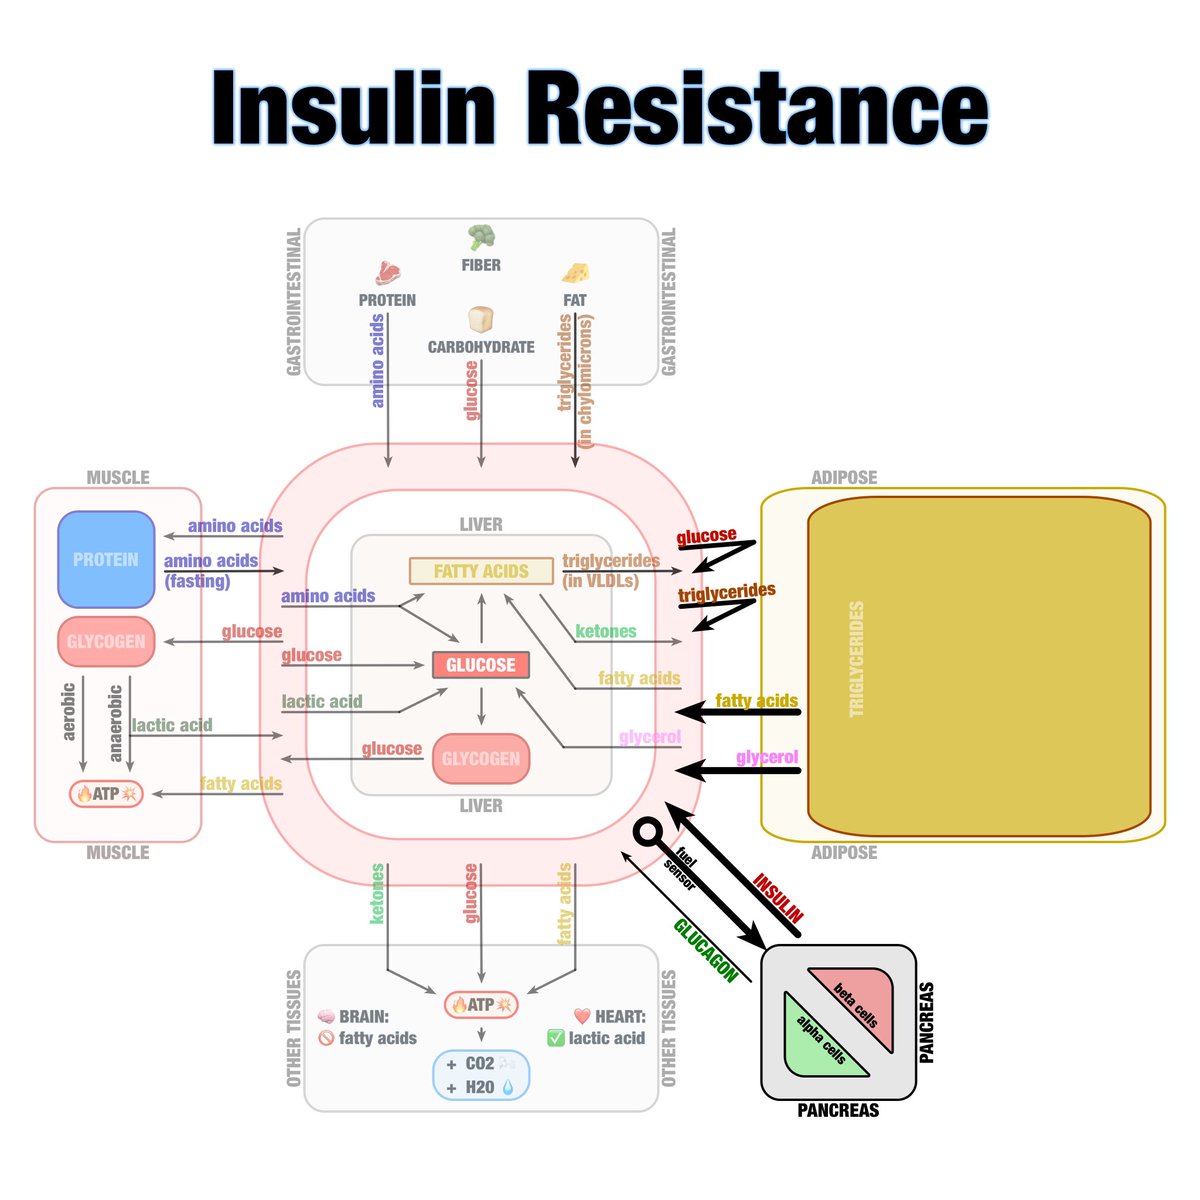 Really just underscores the fact that insulin is the CART and not the HORSE. Insulin is simply responding to fuels in the bloodstream, trying to clear the bloodstream of excess fuels, maintaining homeostatic levels opposite of glucagon. Glucagon raises fuels, insulin lowers.